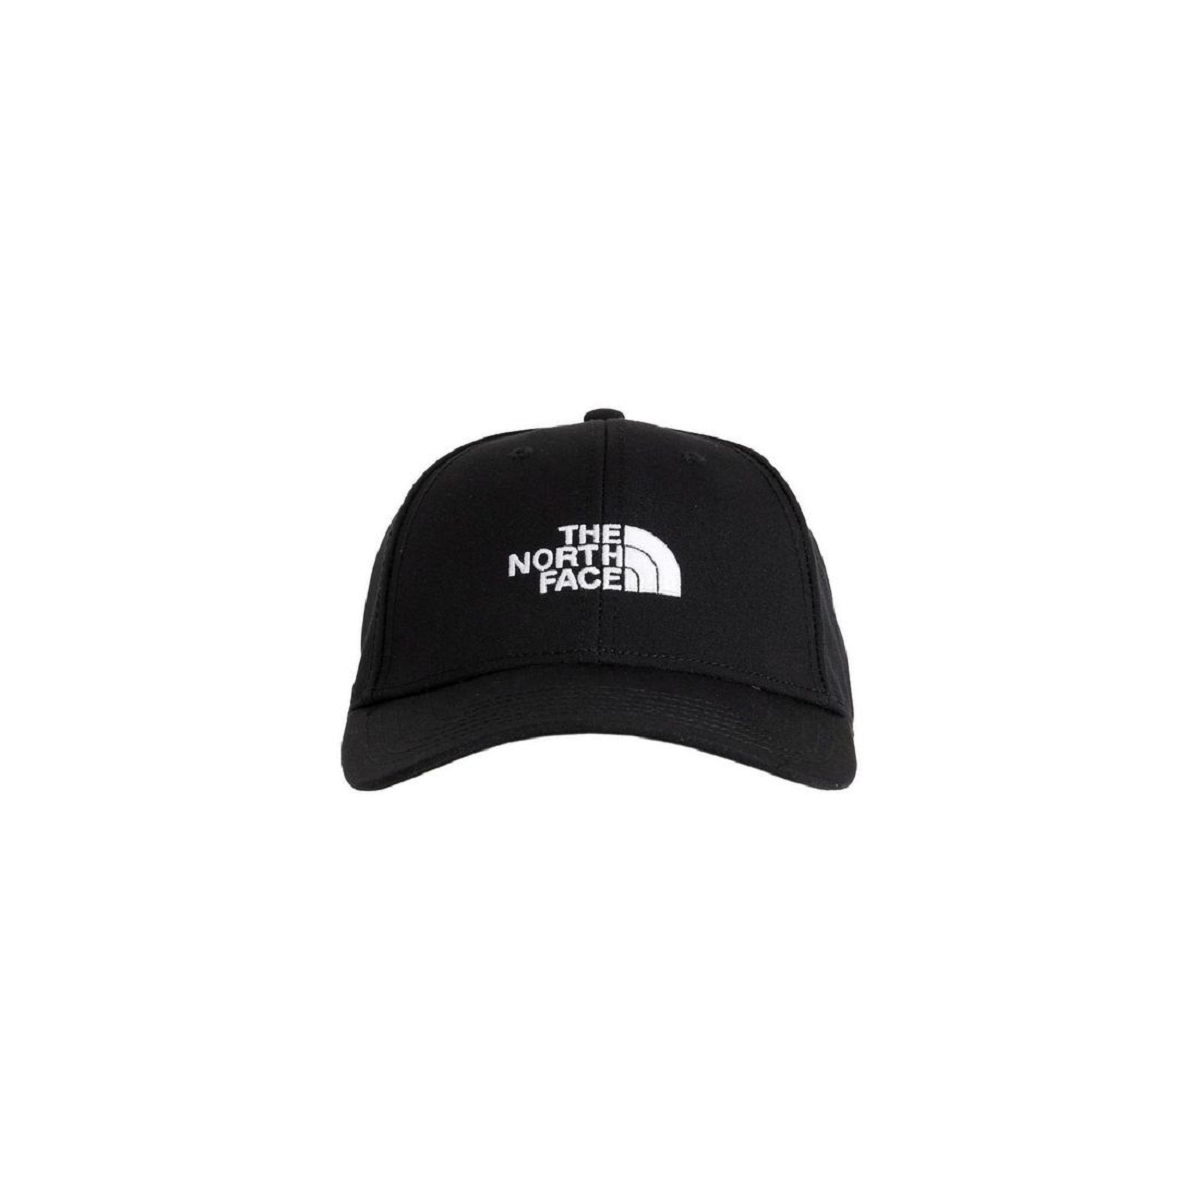 The north face casquette black homme